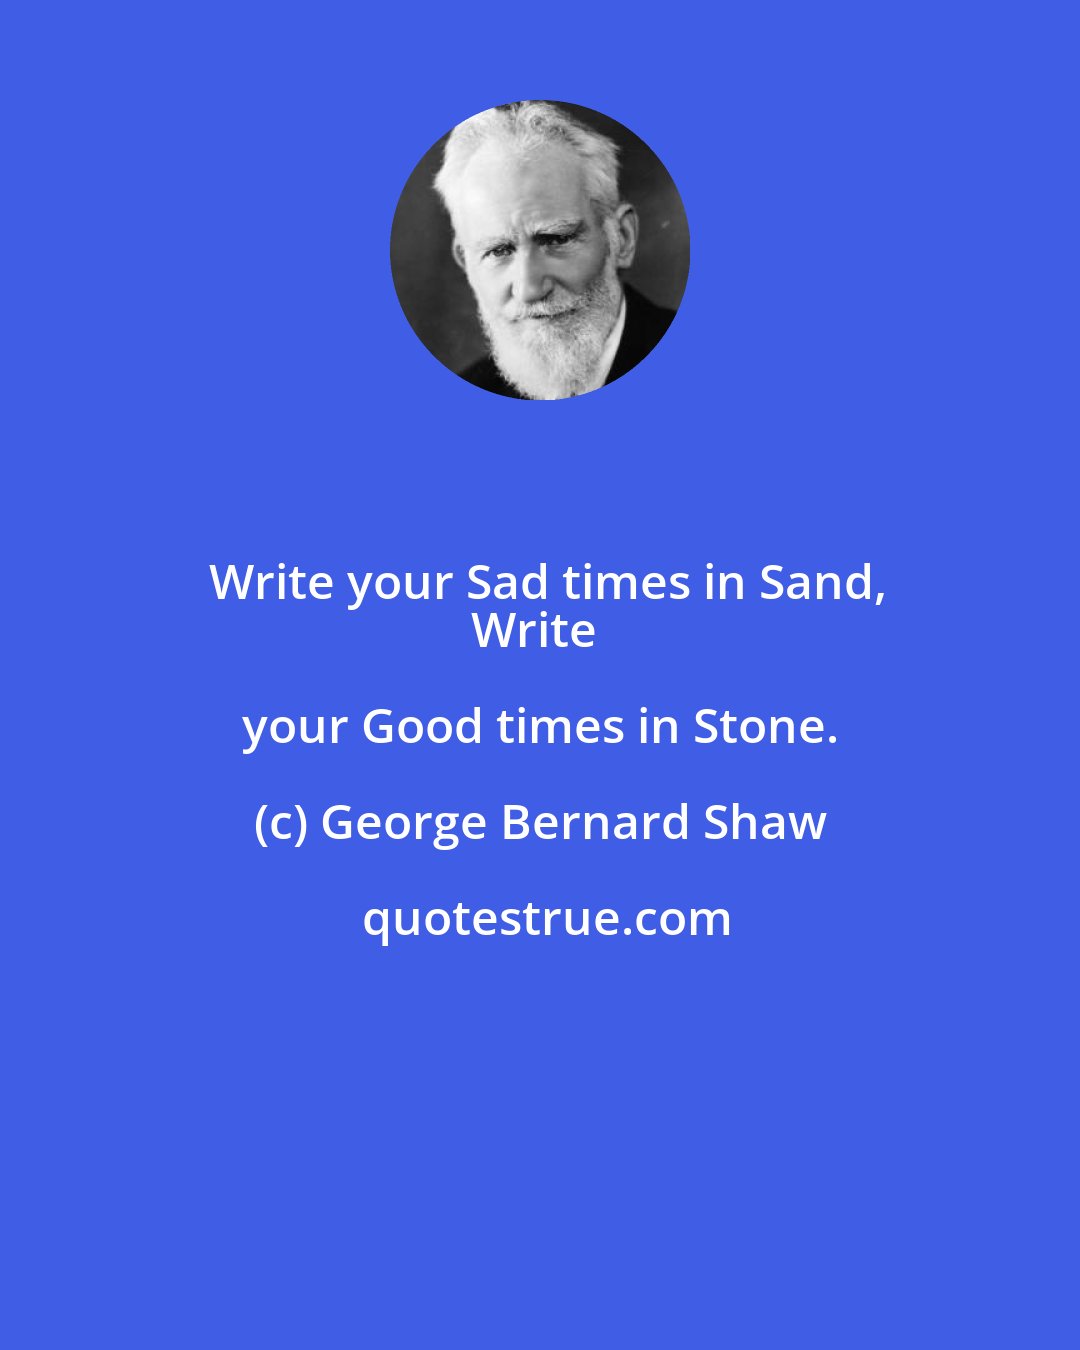 George Bernard Shaw: Write your Sad times in Sand,
Write your Good times in Stone.